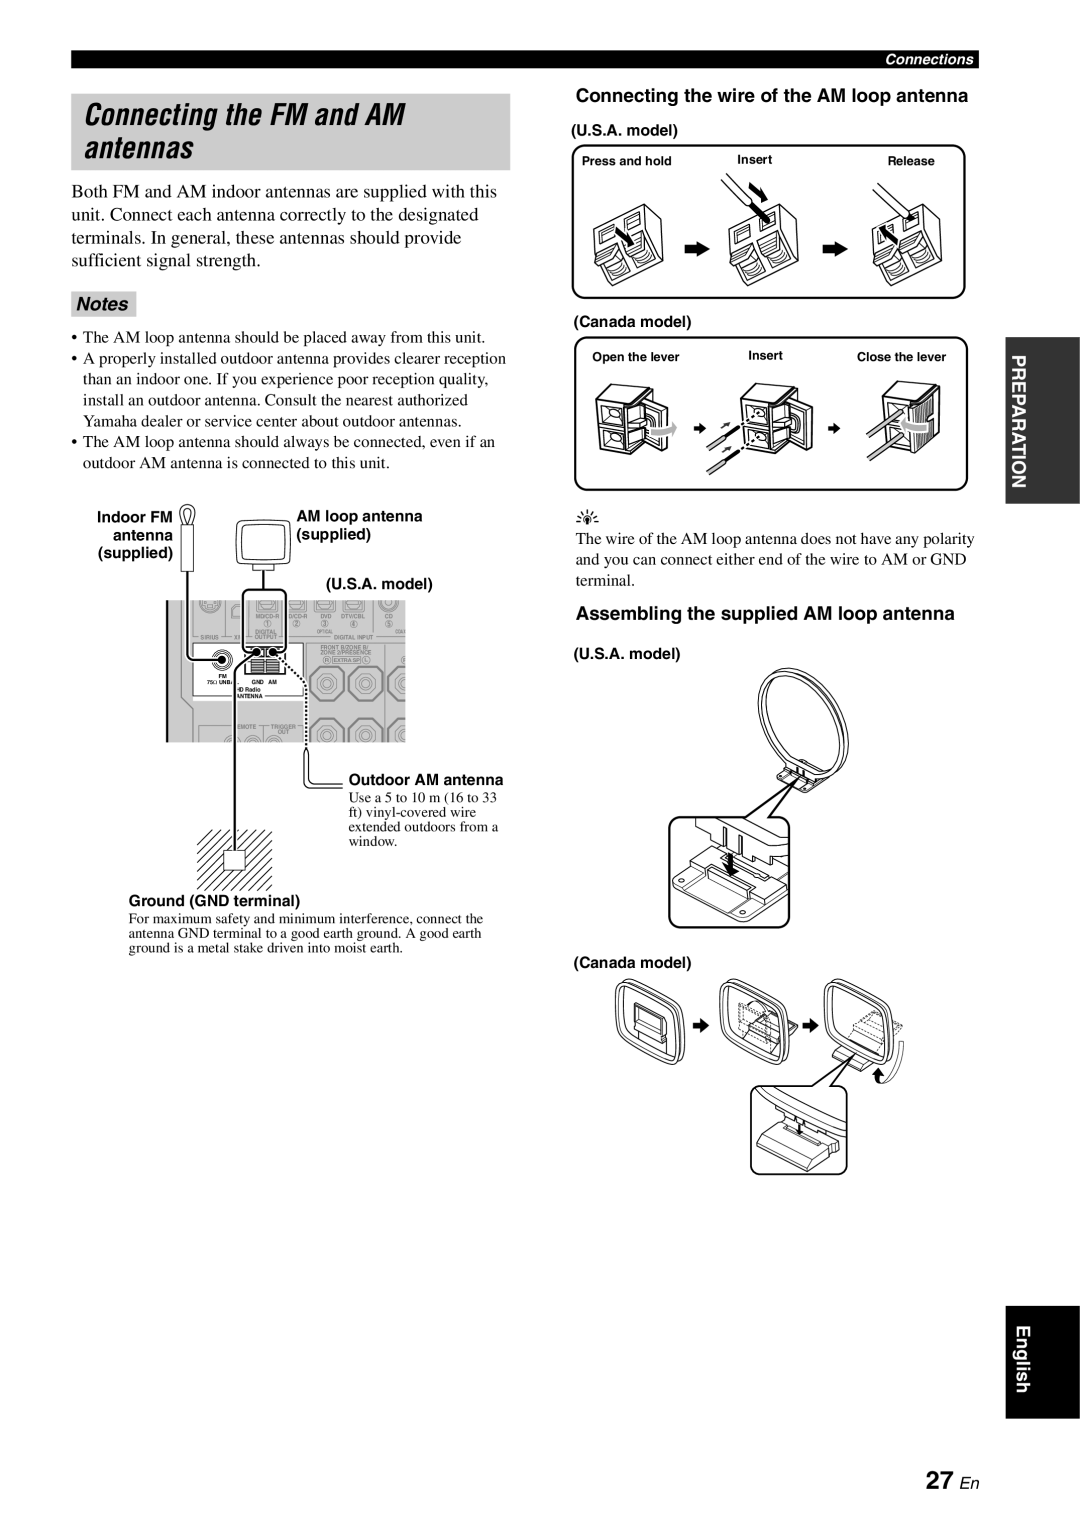 Yamaha RX-V863 owner manual Connecting the FM and AM antennas, 27 En 